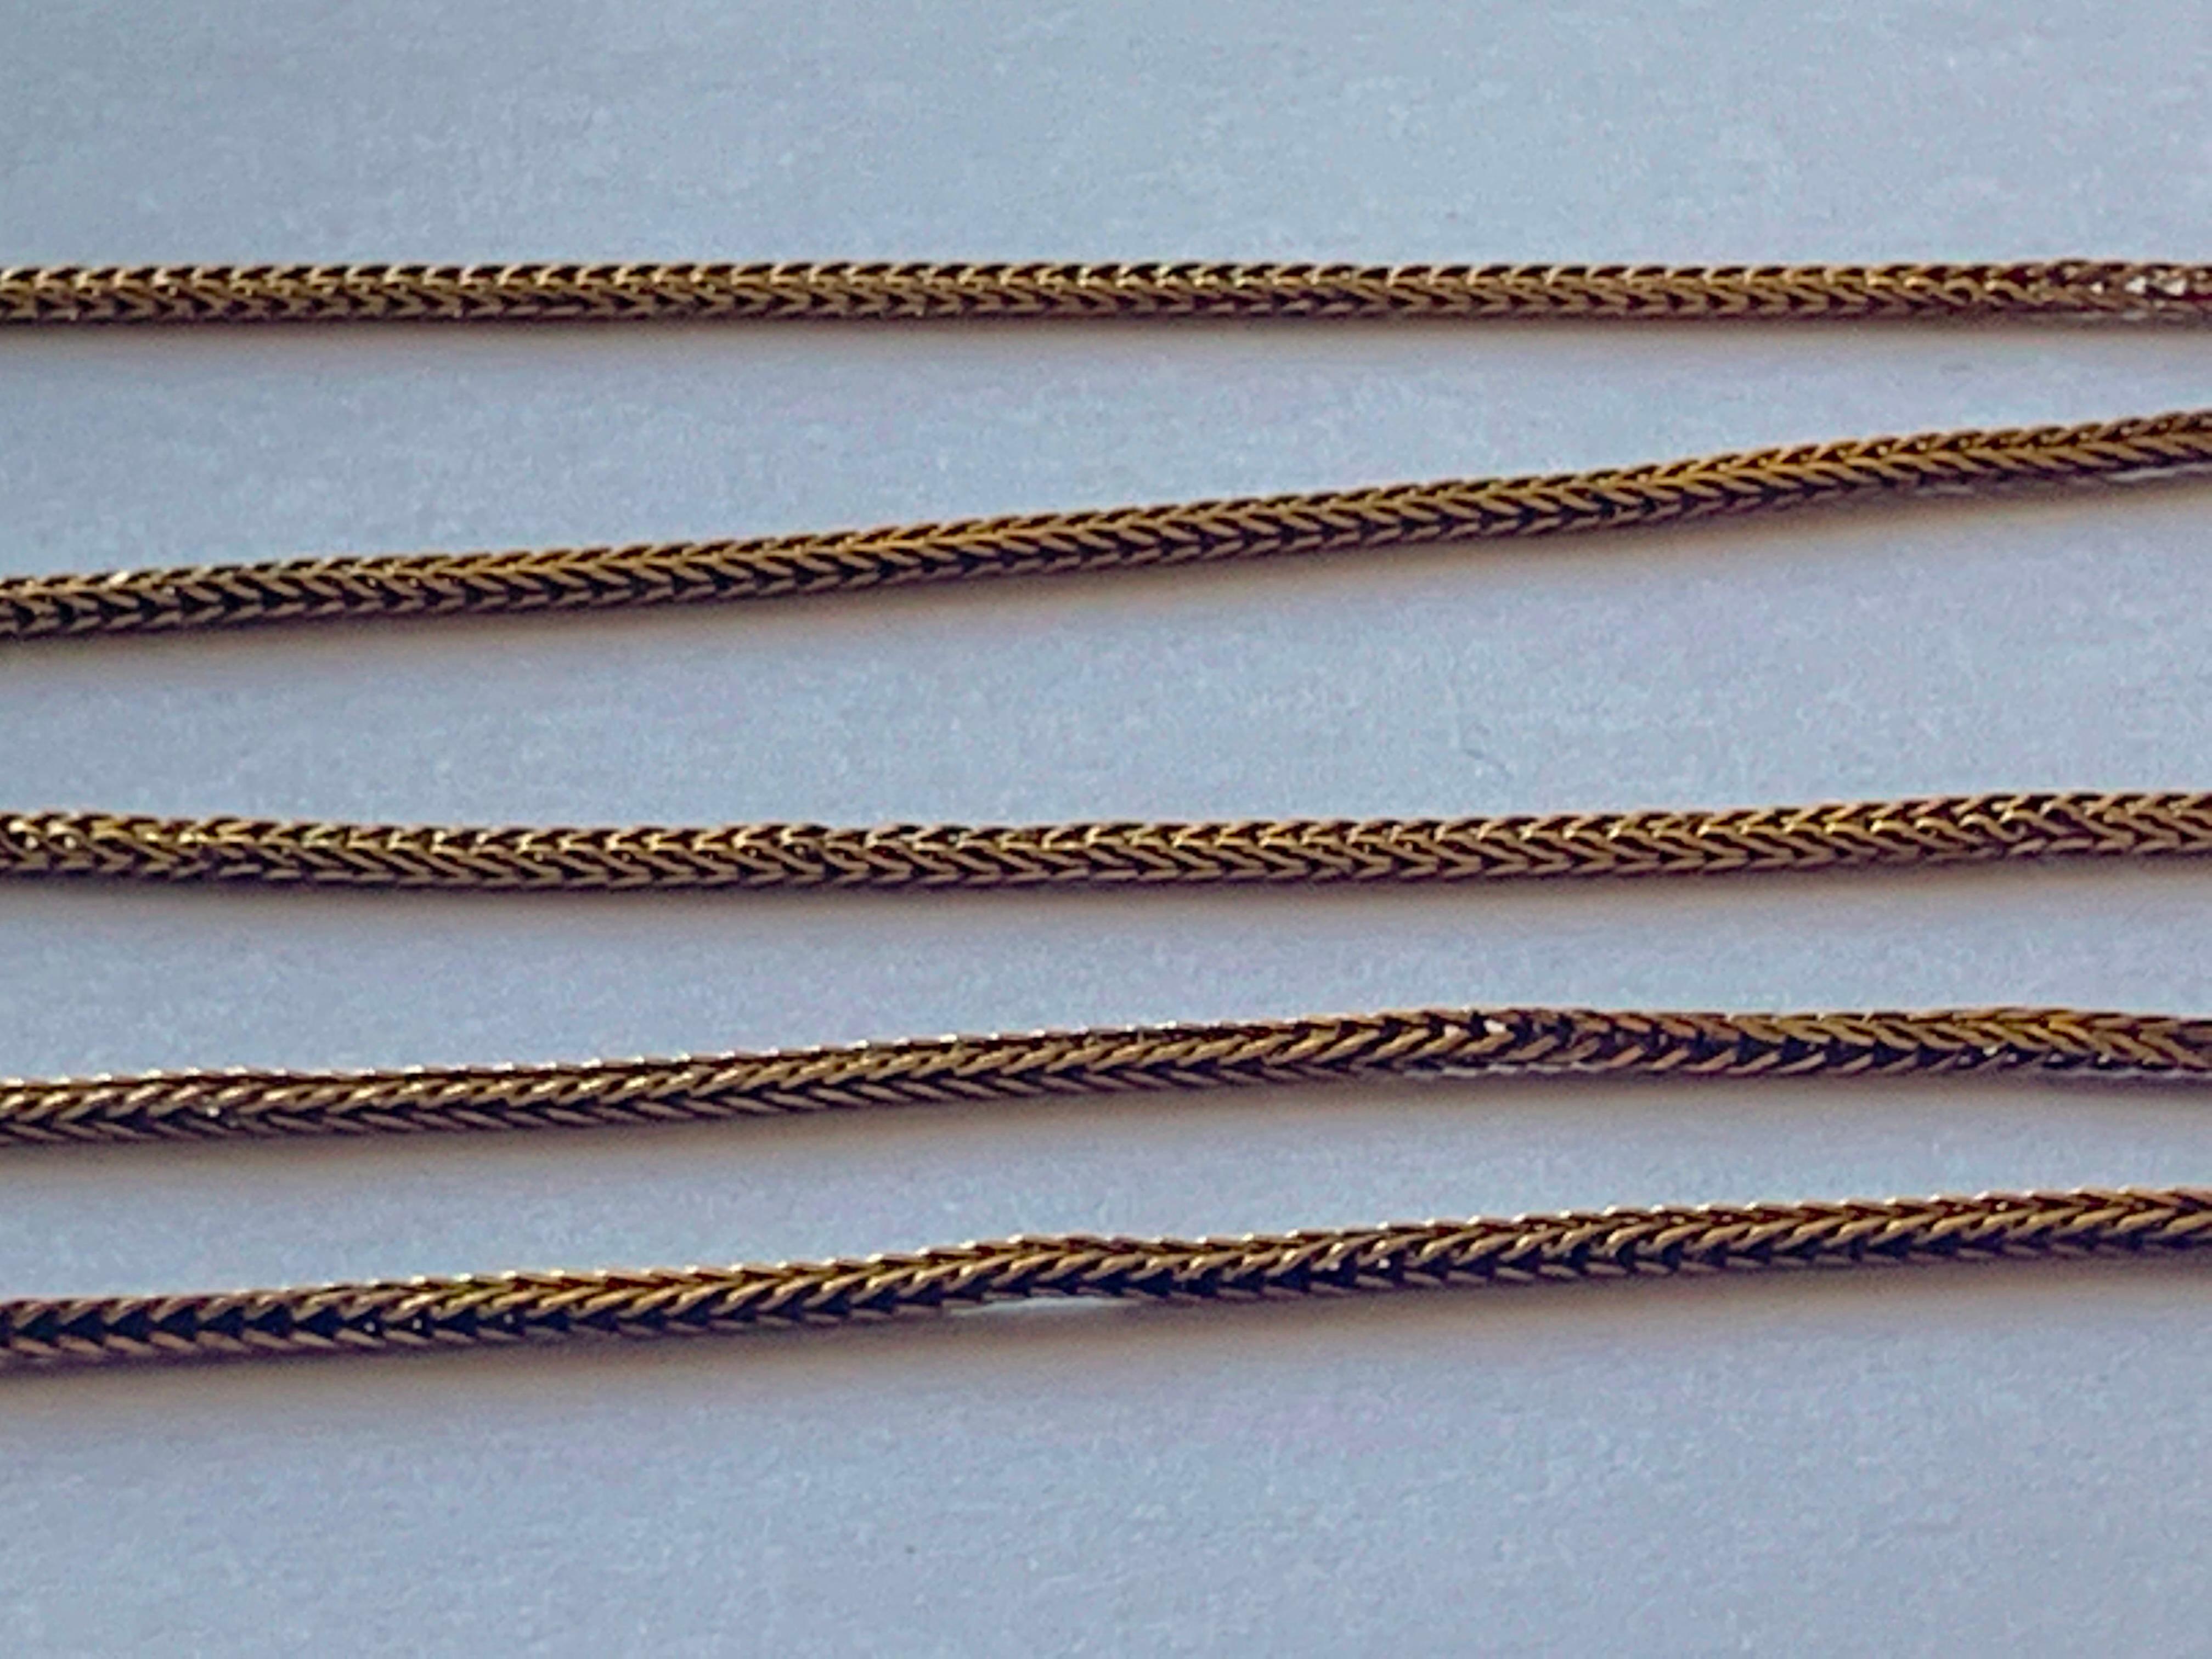 Antique 18ct Gold Herringbone Chain 
by Italian Goldsmiths Balestra from Vicenza 
Length 25.25 Inches
Thickness 2 millimetres
Condition: Antique patina with signs of wear
there is a soldered repair section or possibly an original requested join 
to